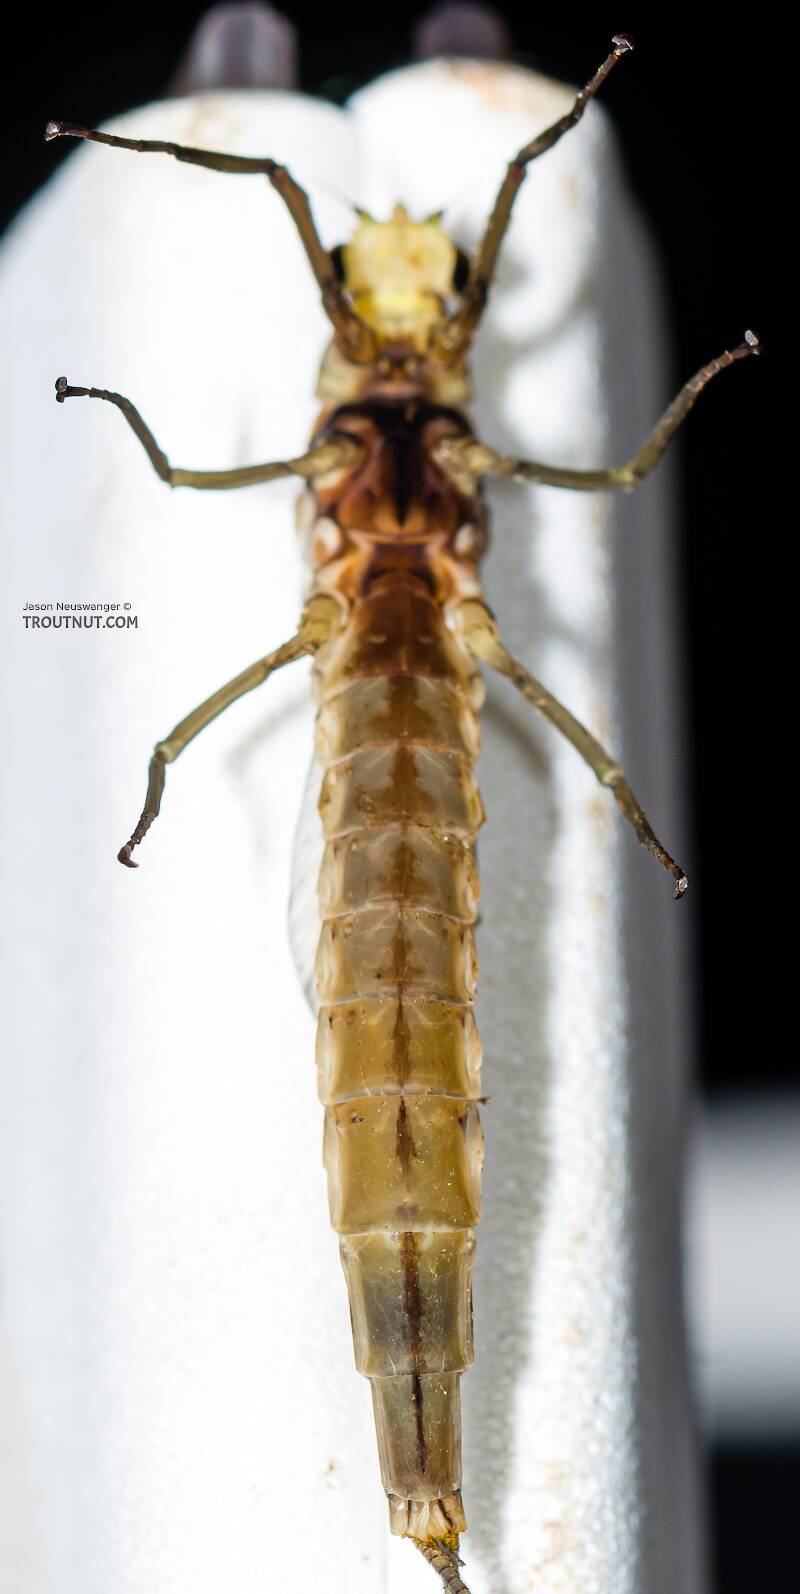 Ventral view of a Female Hexagenia limbata (Ephemeridae) (Hex) Mayfly Dun from the Namekagon River in Wisconsin